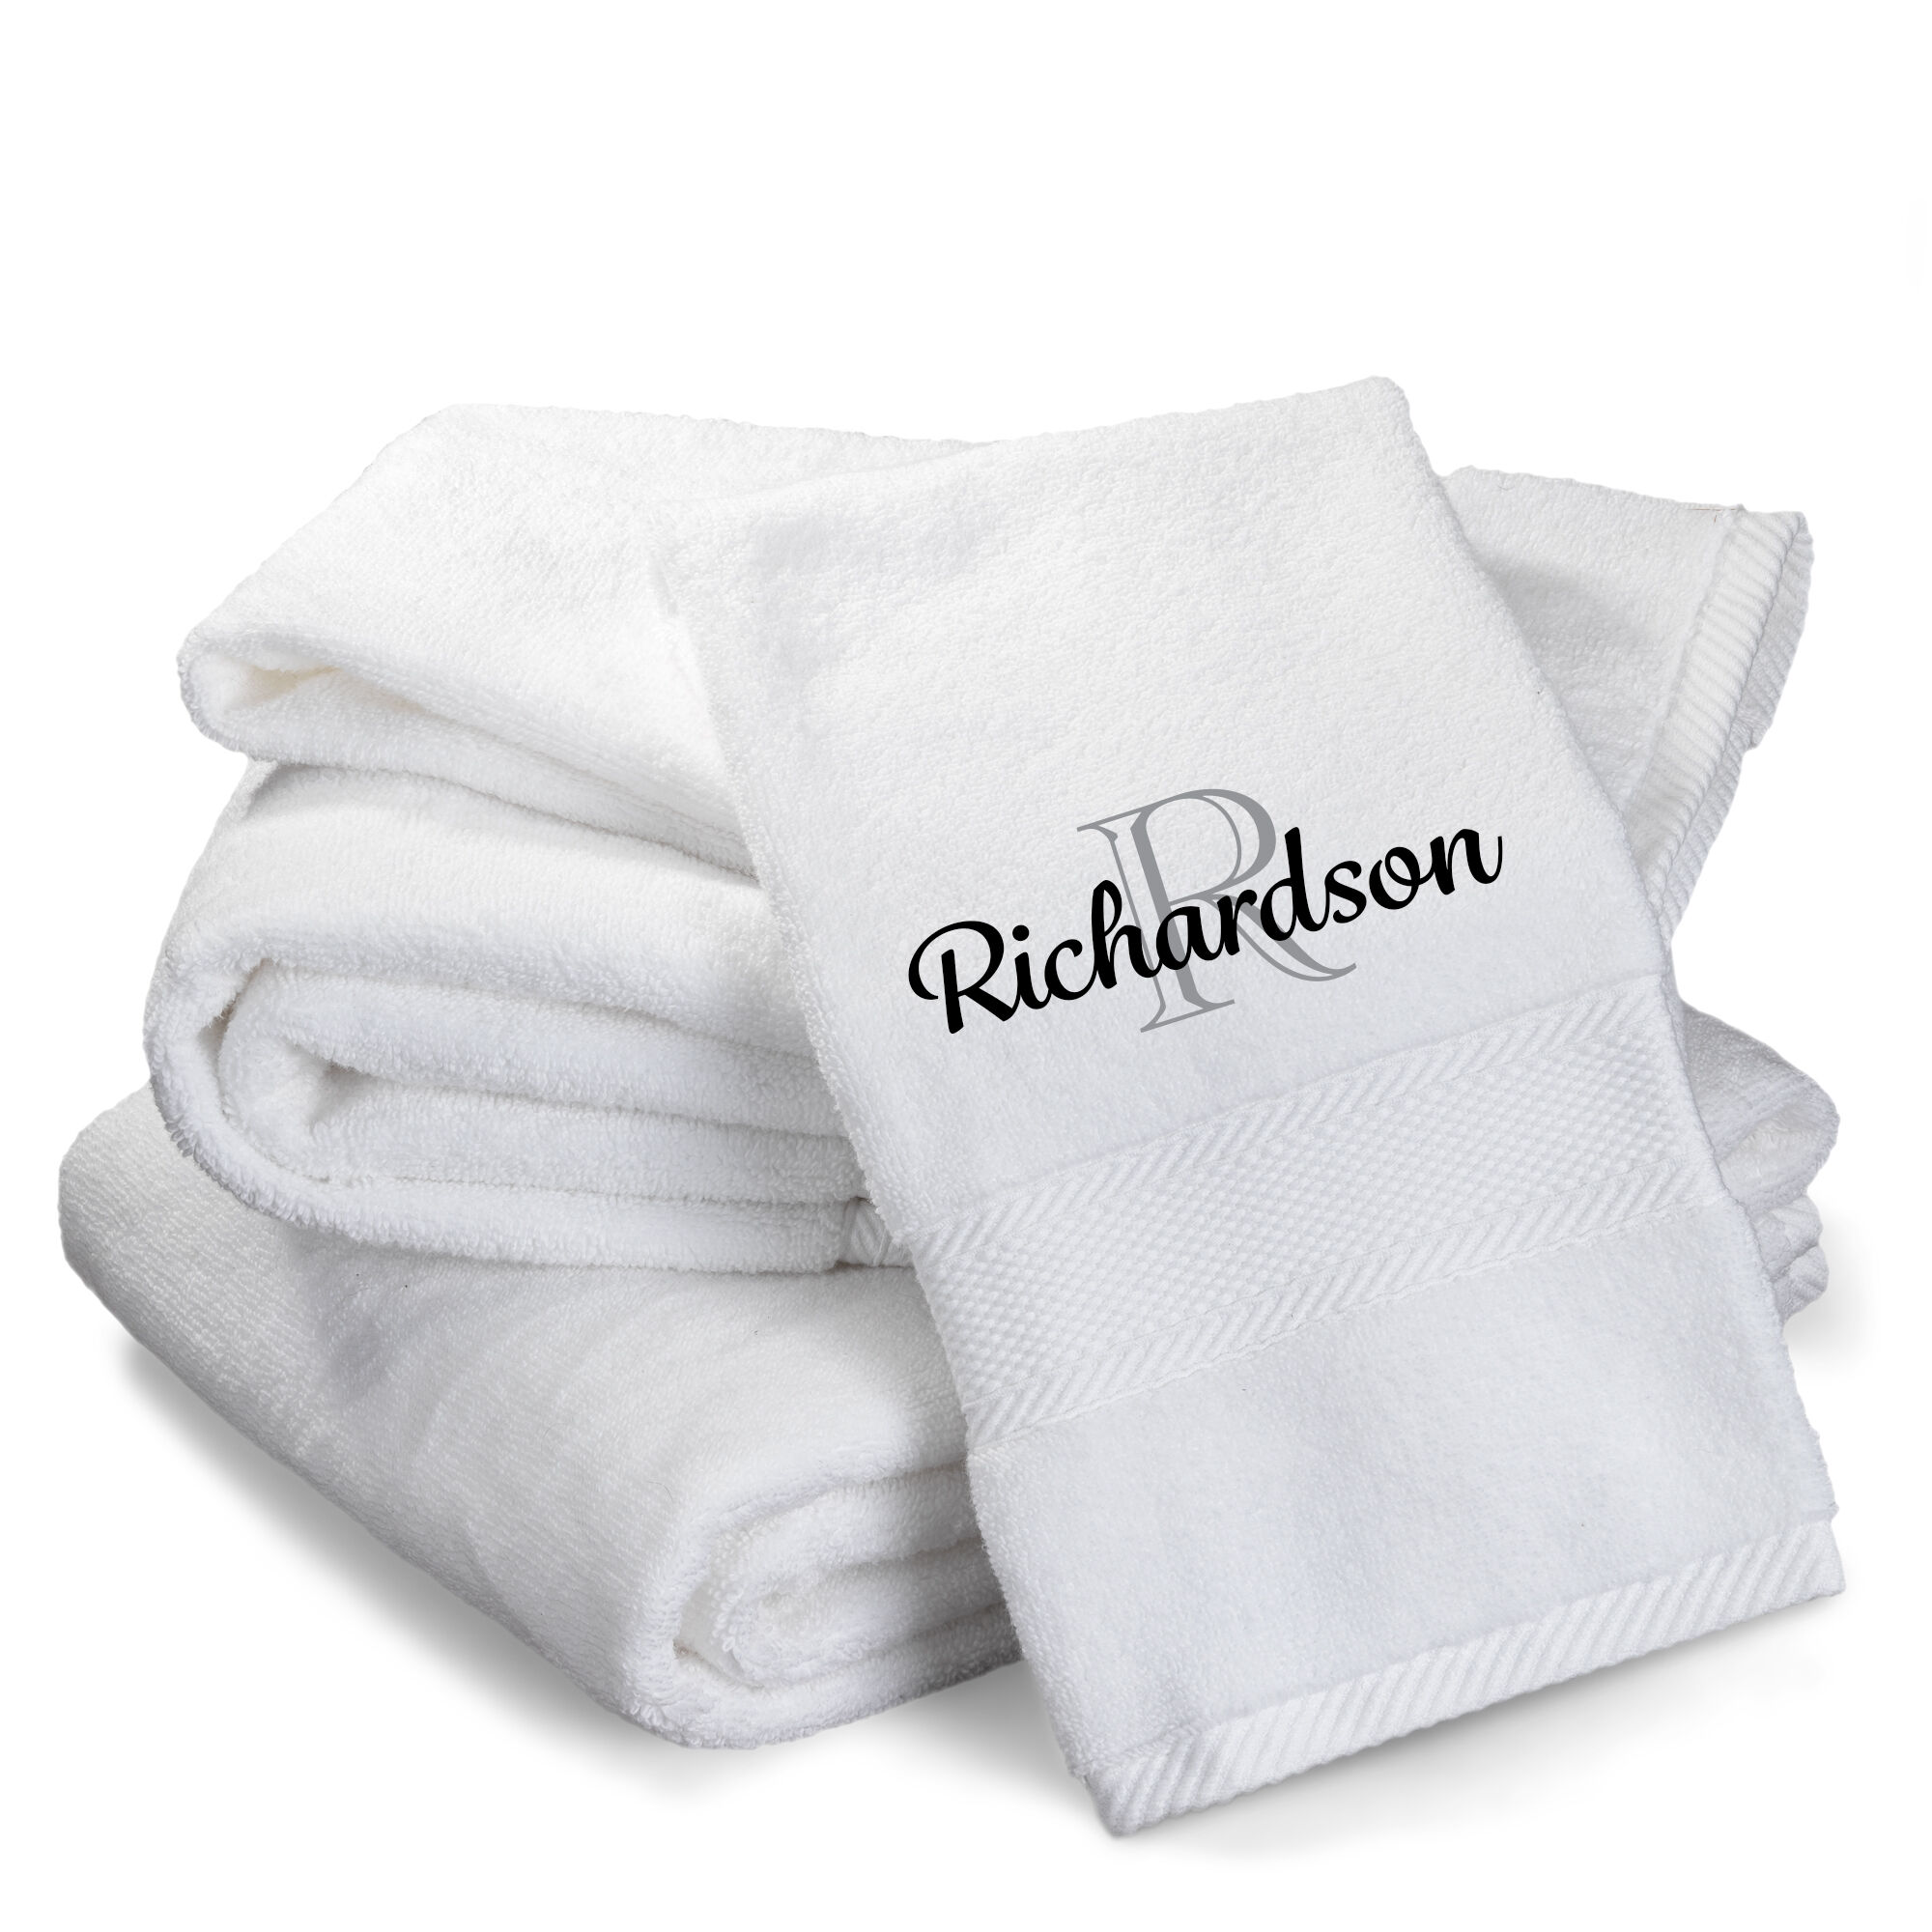 PERSONALISED 2 BATH TOWELS BEAUTIFULLY EMBROIDERED GIFT WEDDING ANNIVERSARY 